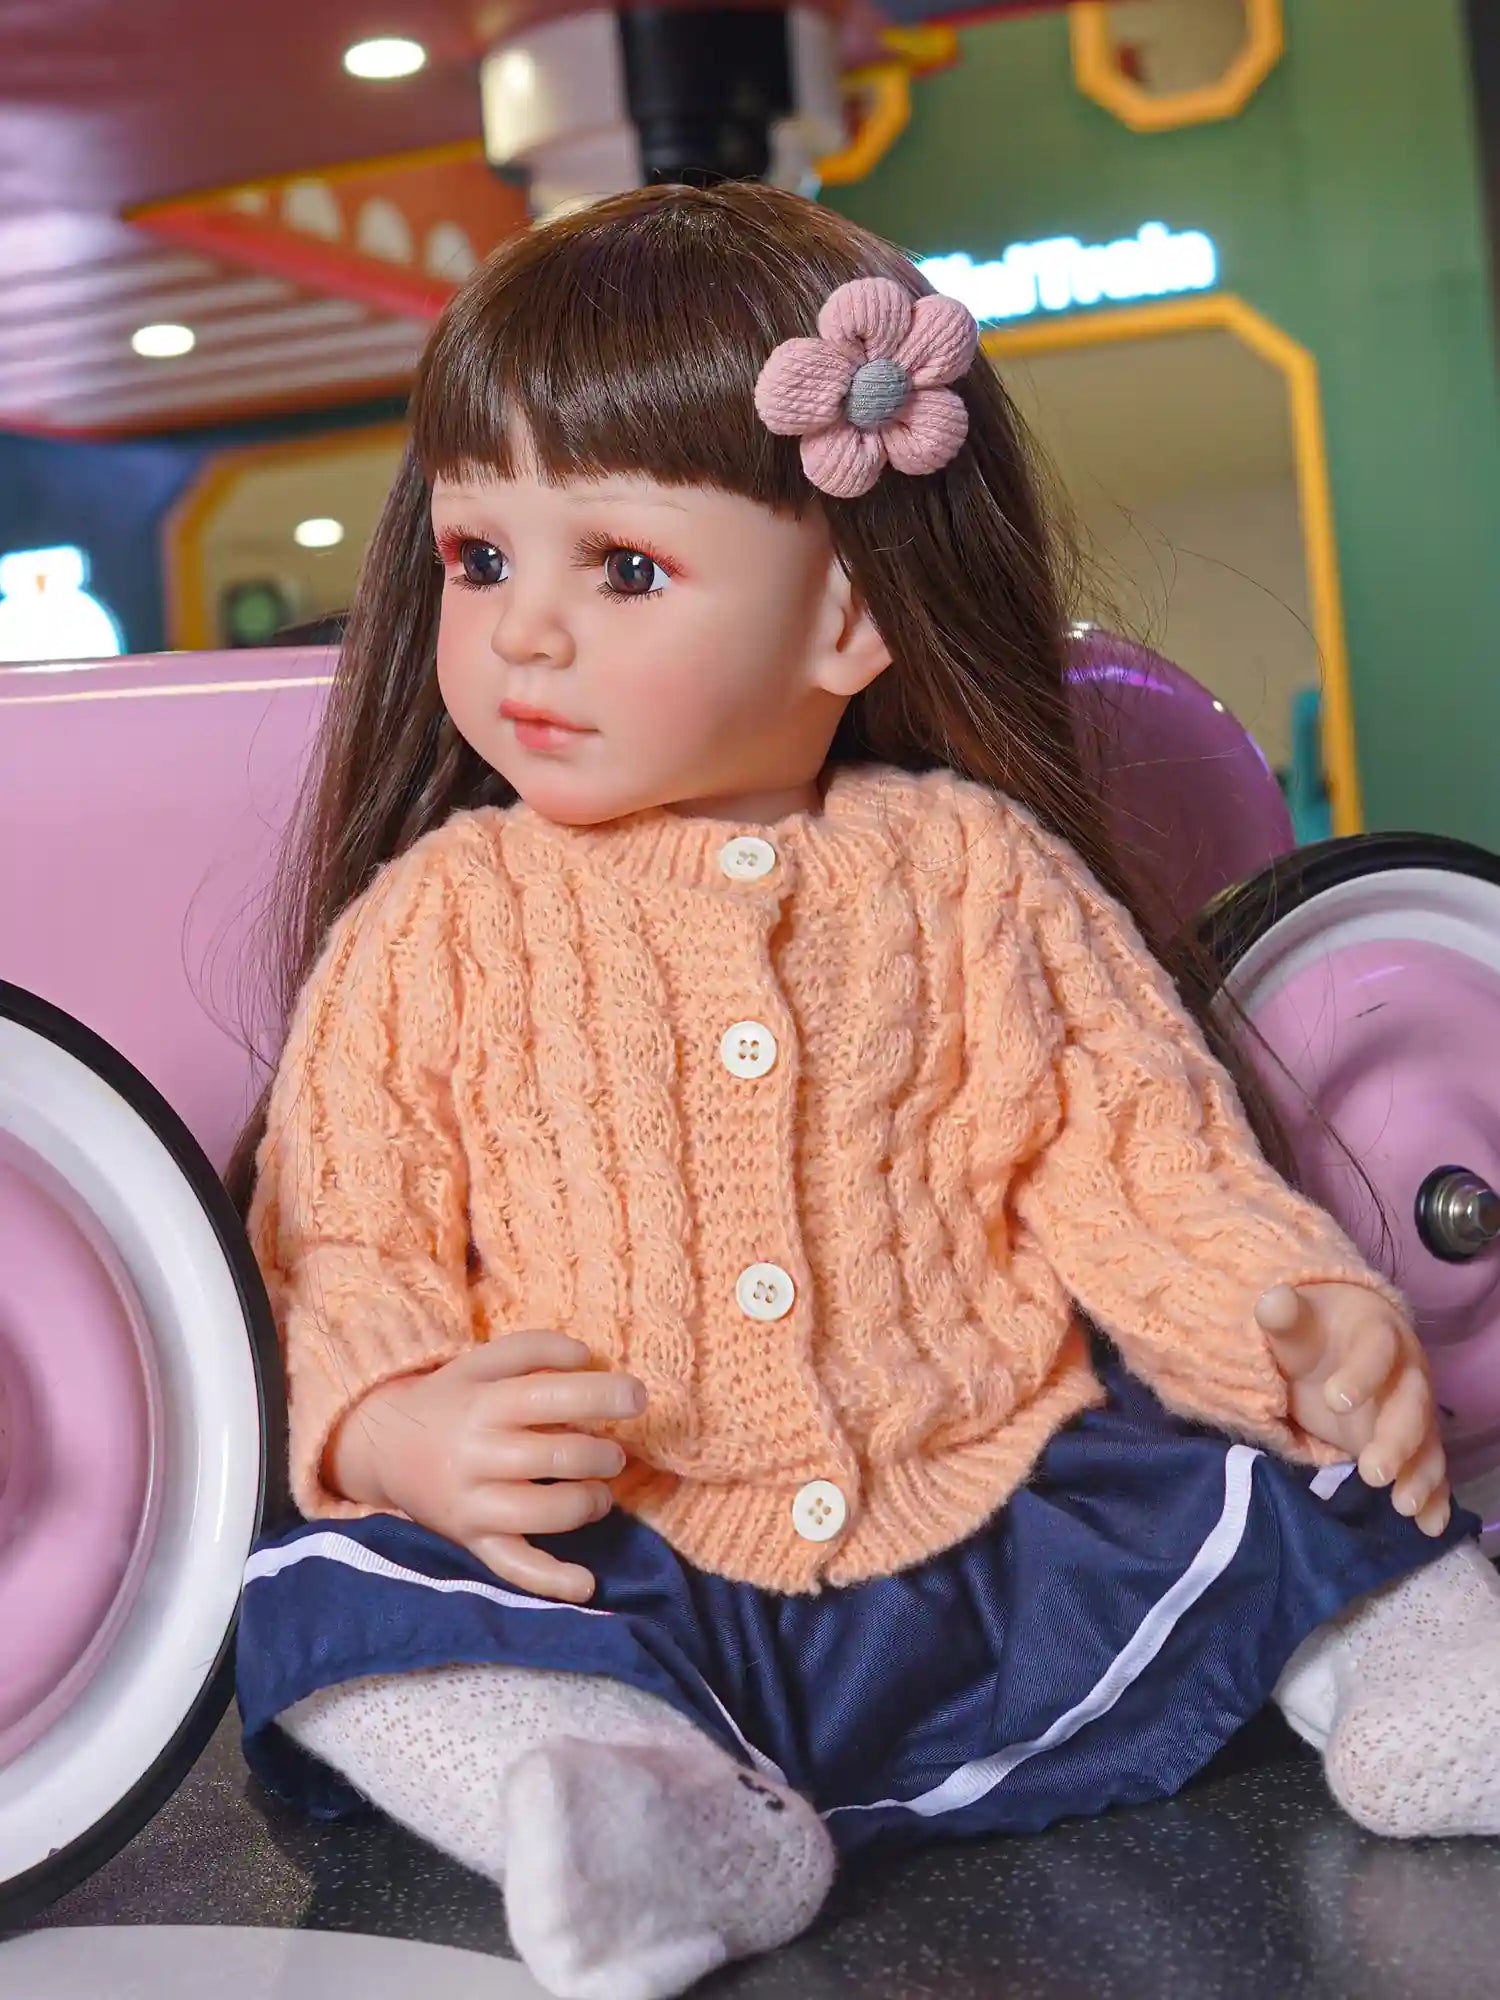 Doll dressed in warm autumn colors, with a delicate flower hair clip, gazing thoughtfully beside a child's car.